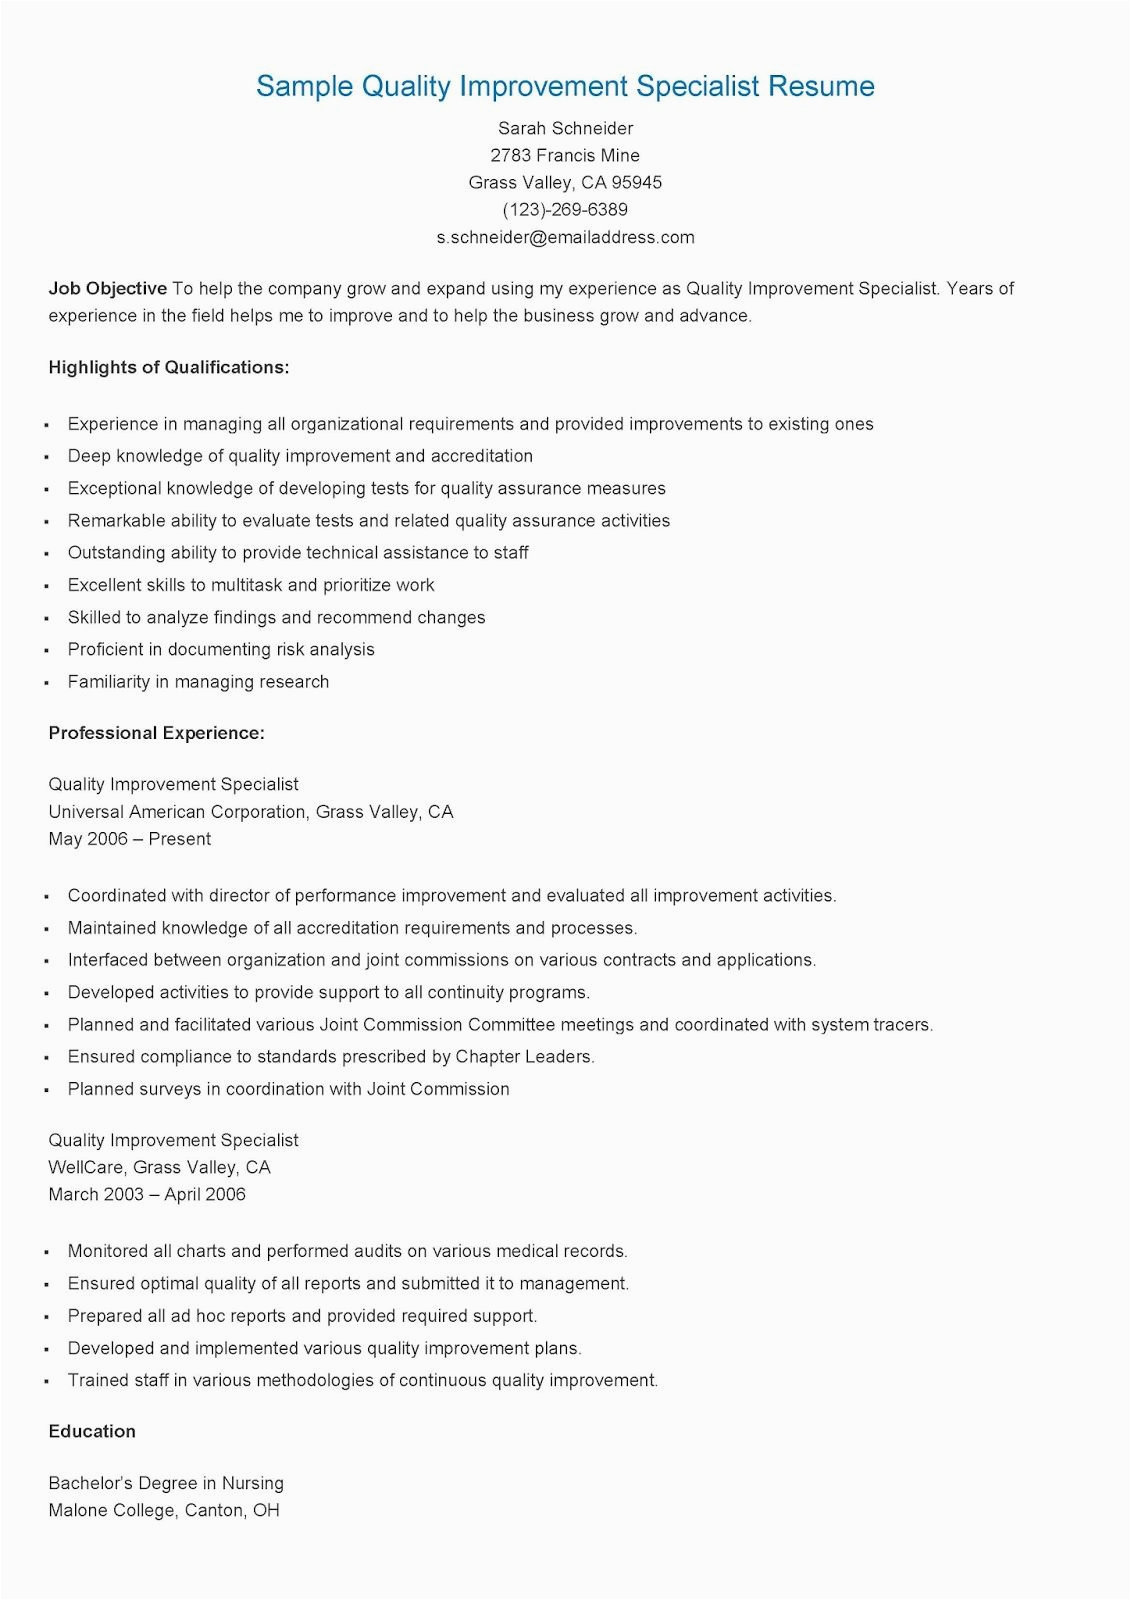 Quality assurance Technician Resume Sample No Experience Sample Quality Improvement Specialist Resume